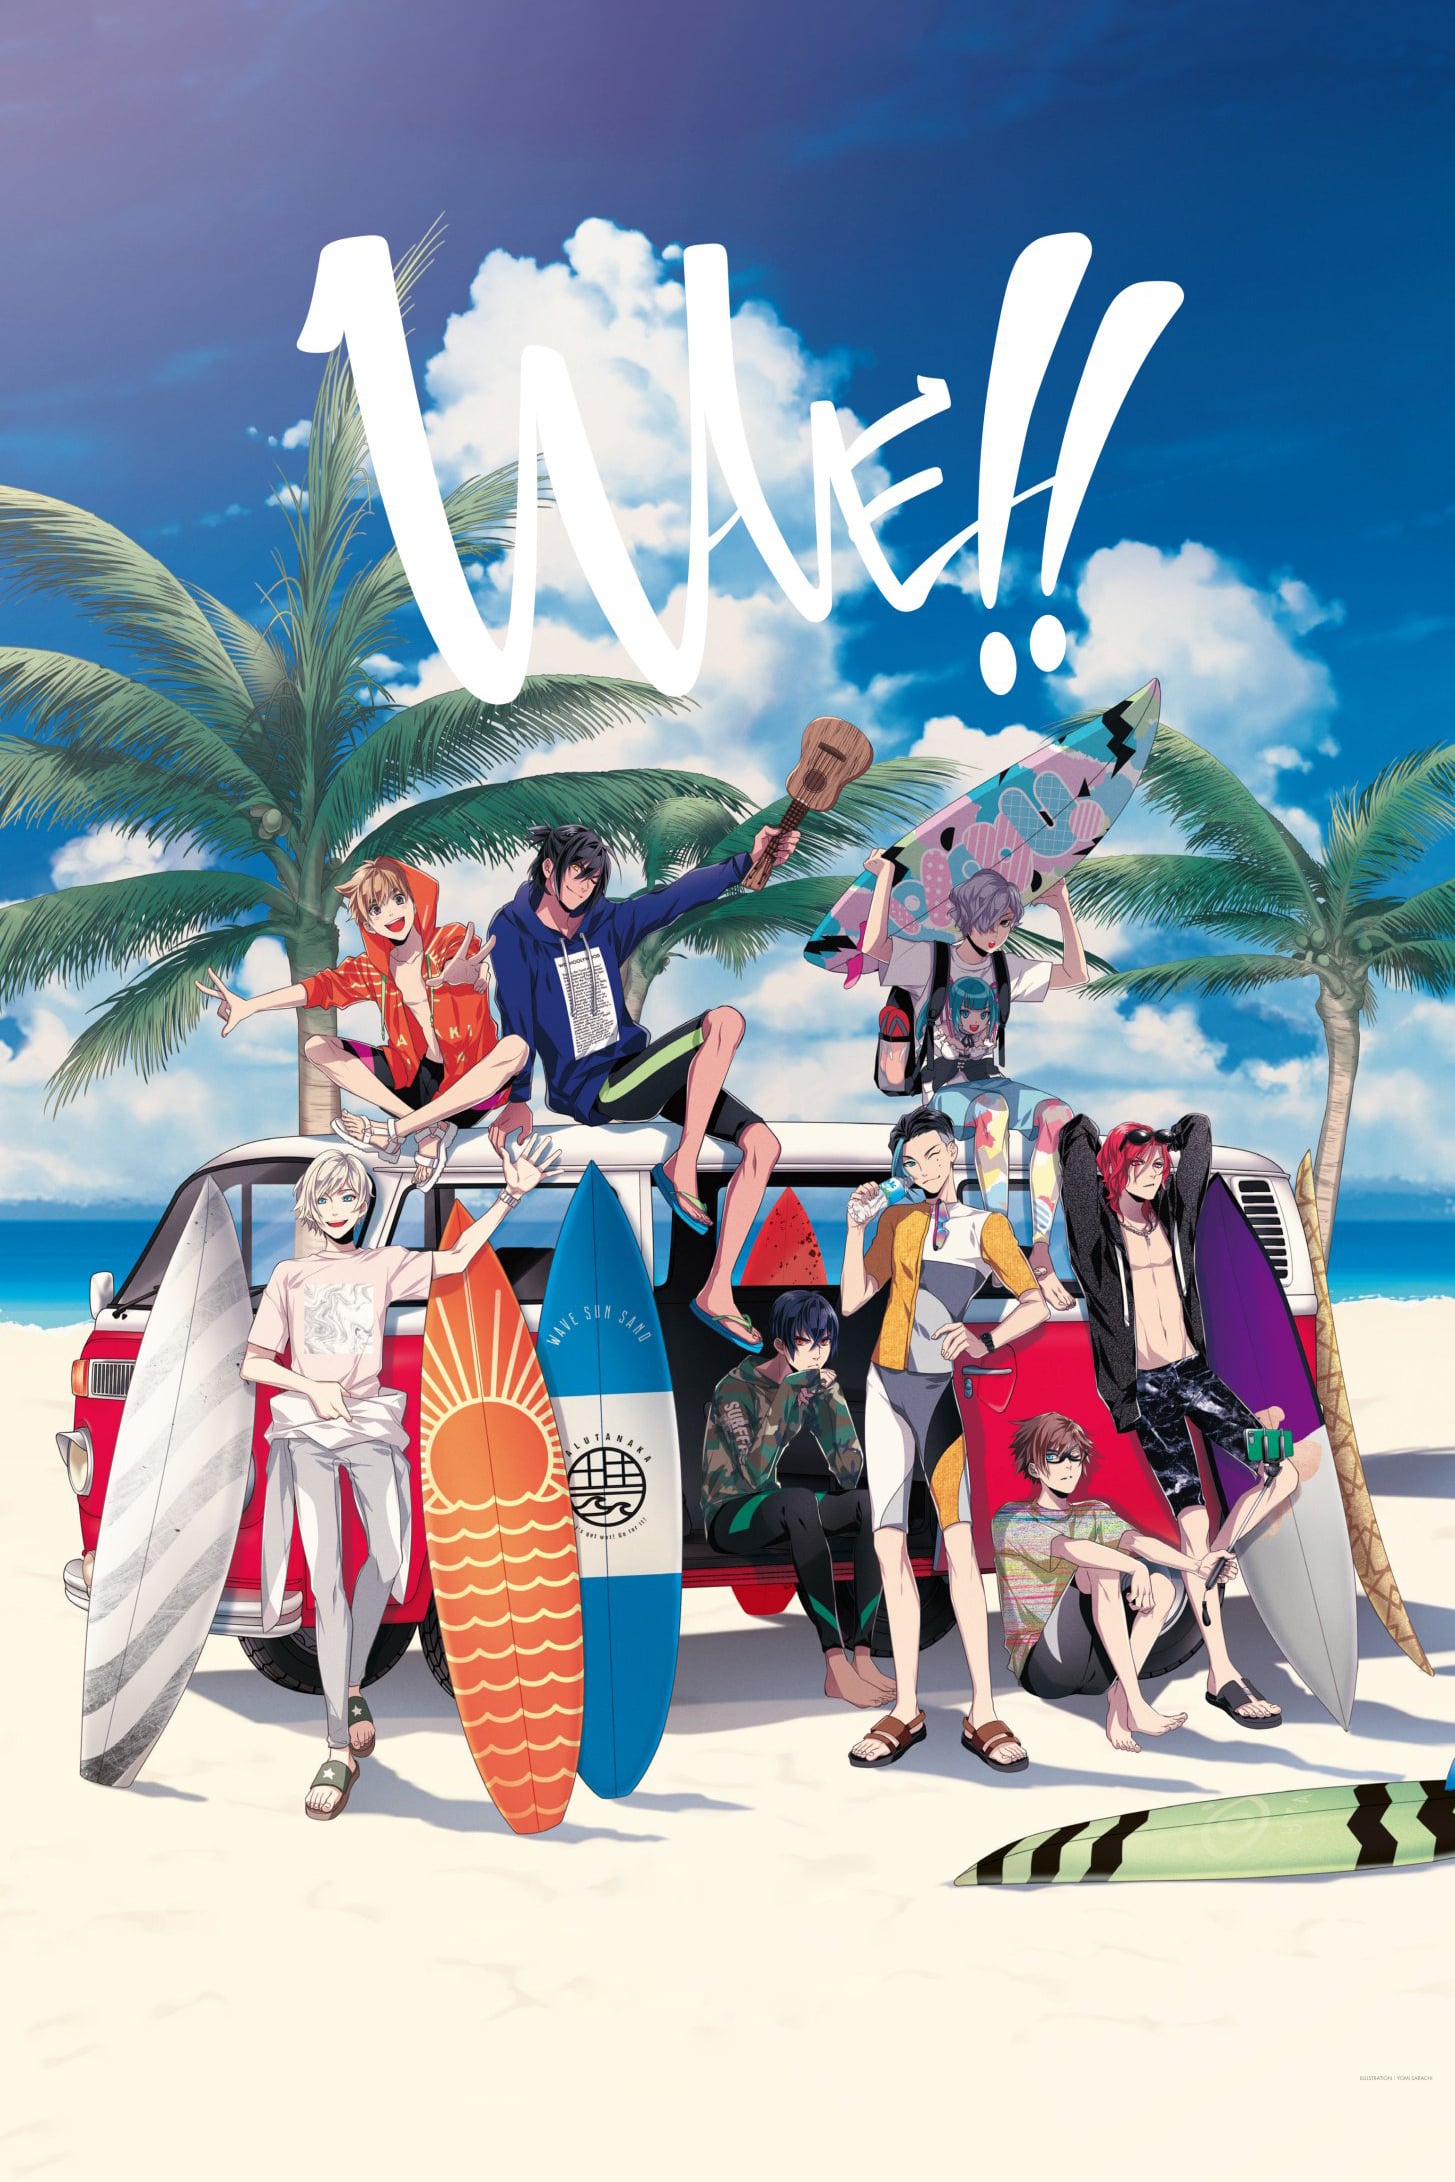 Wave!! Surfing Yappe!! (Anime Movie 2020)